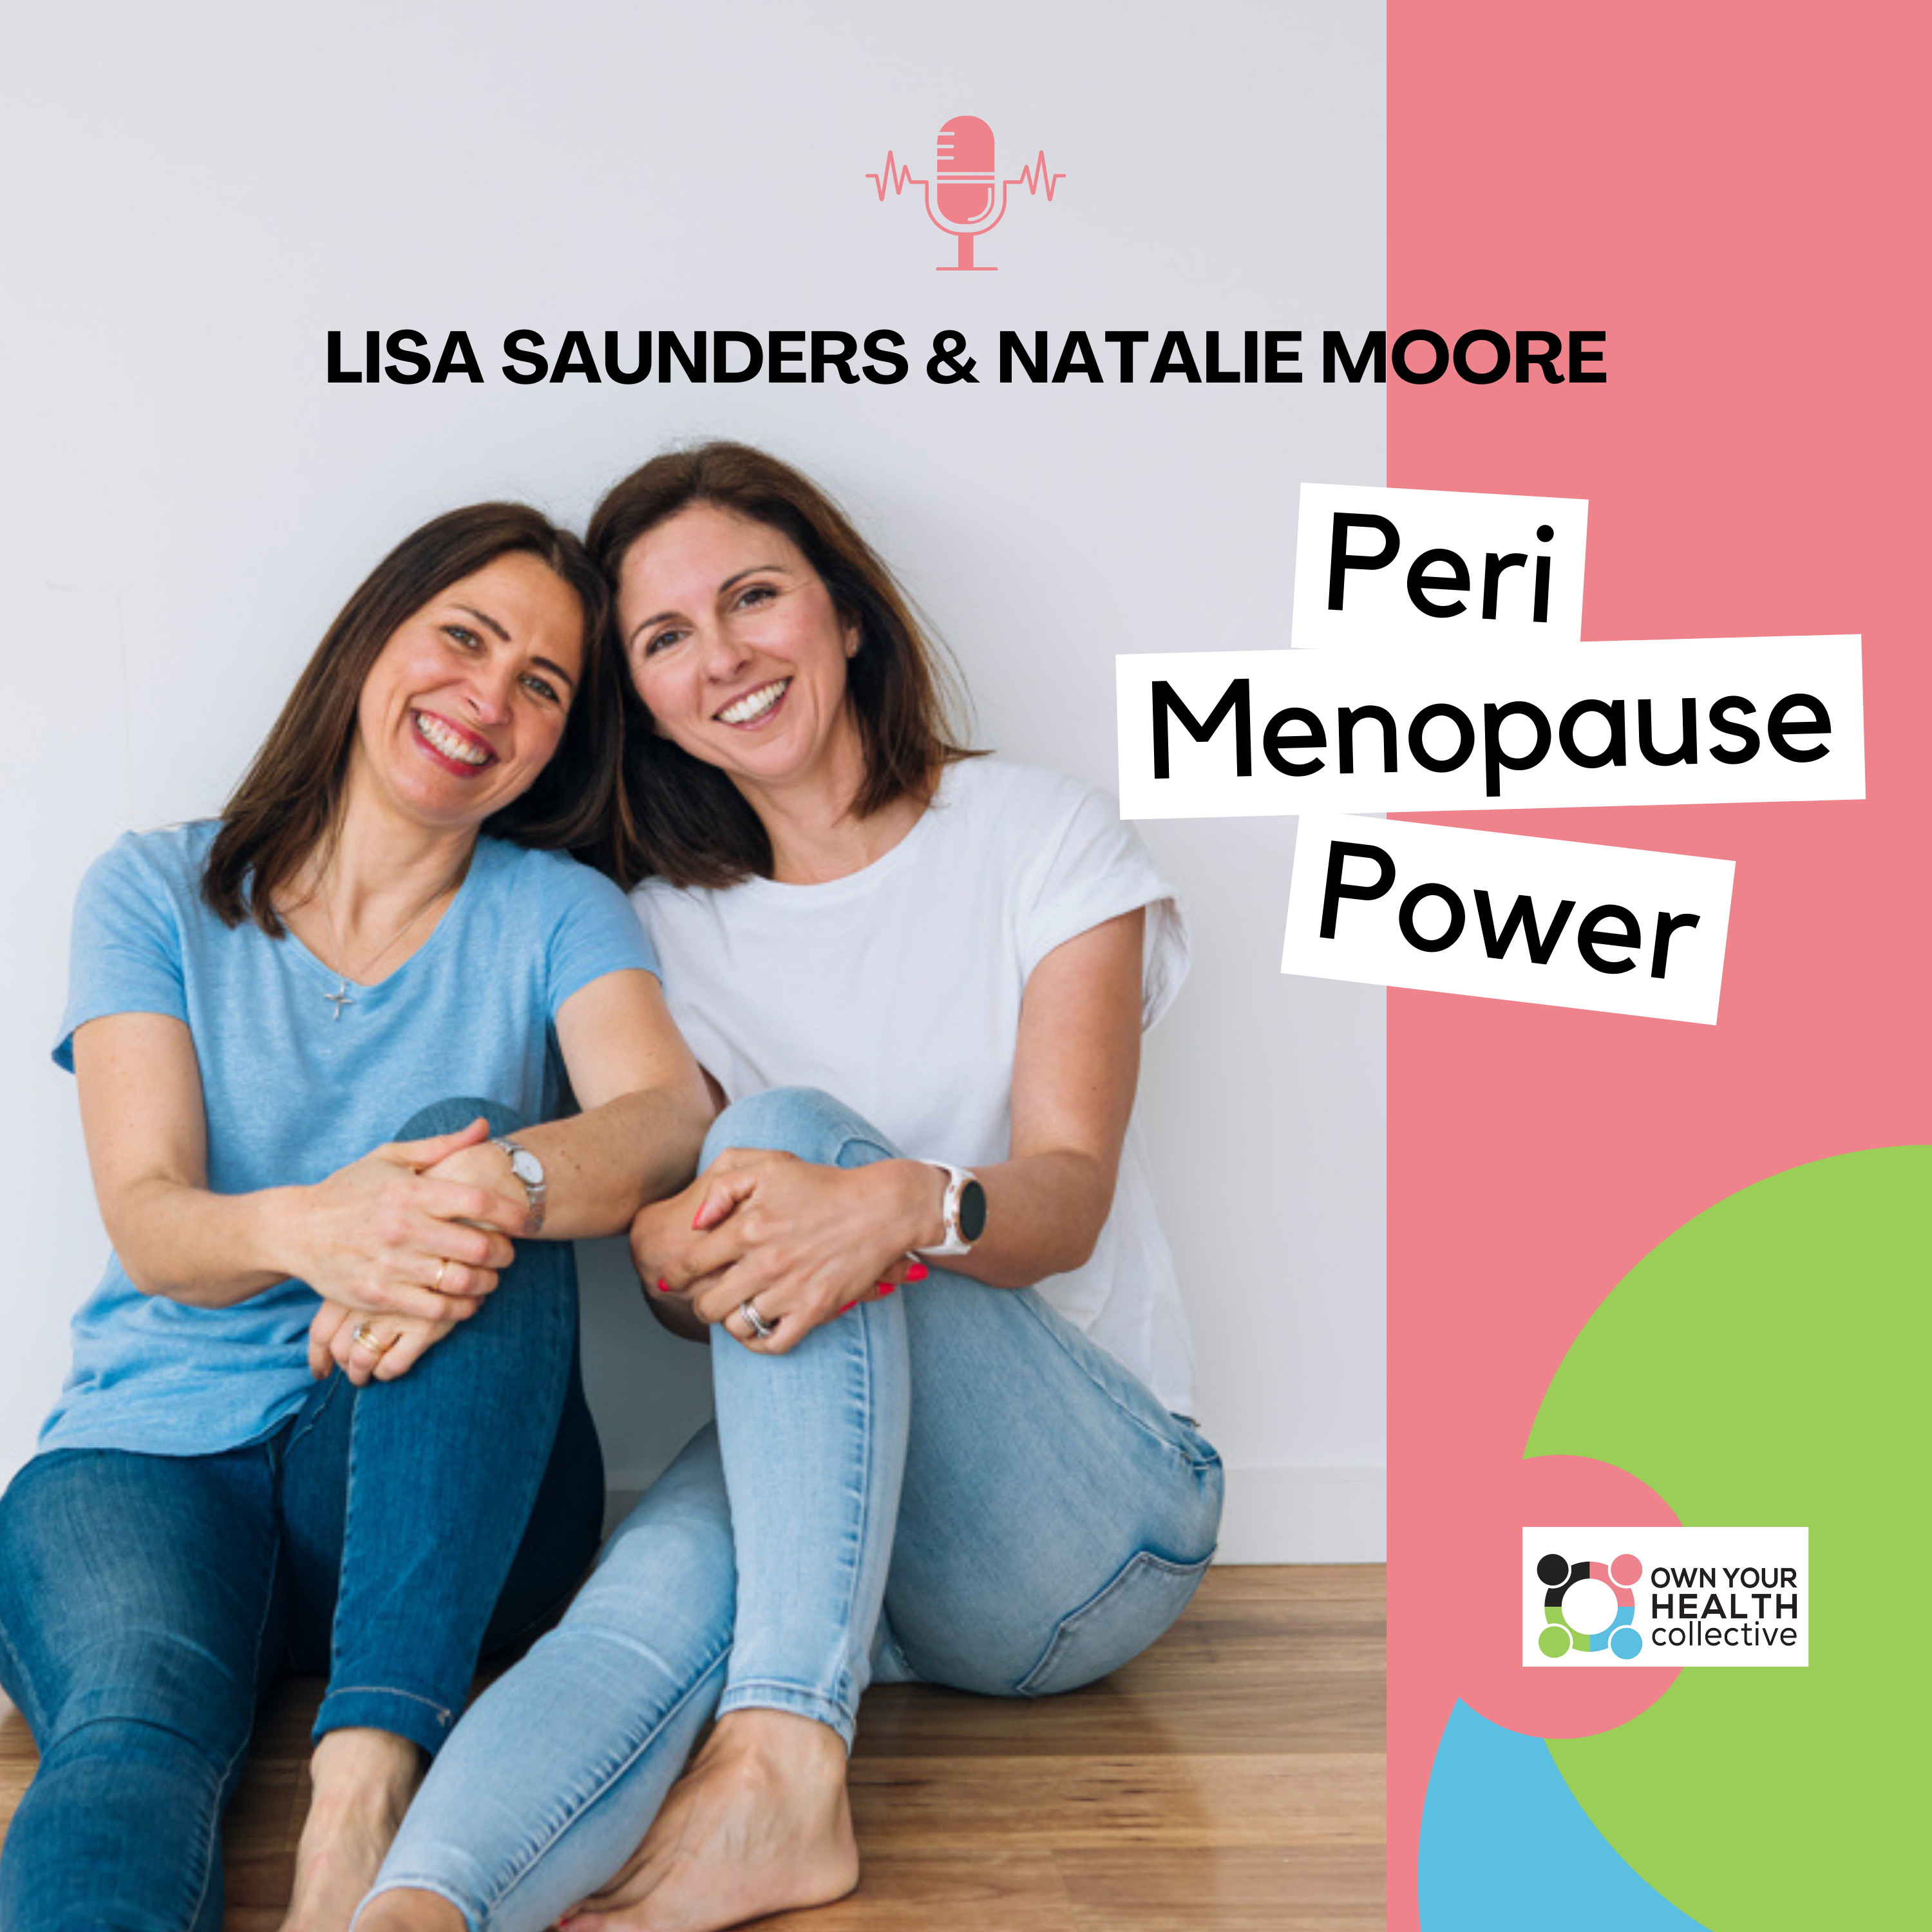 Harnessing your energy in Menopause